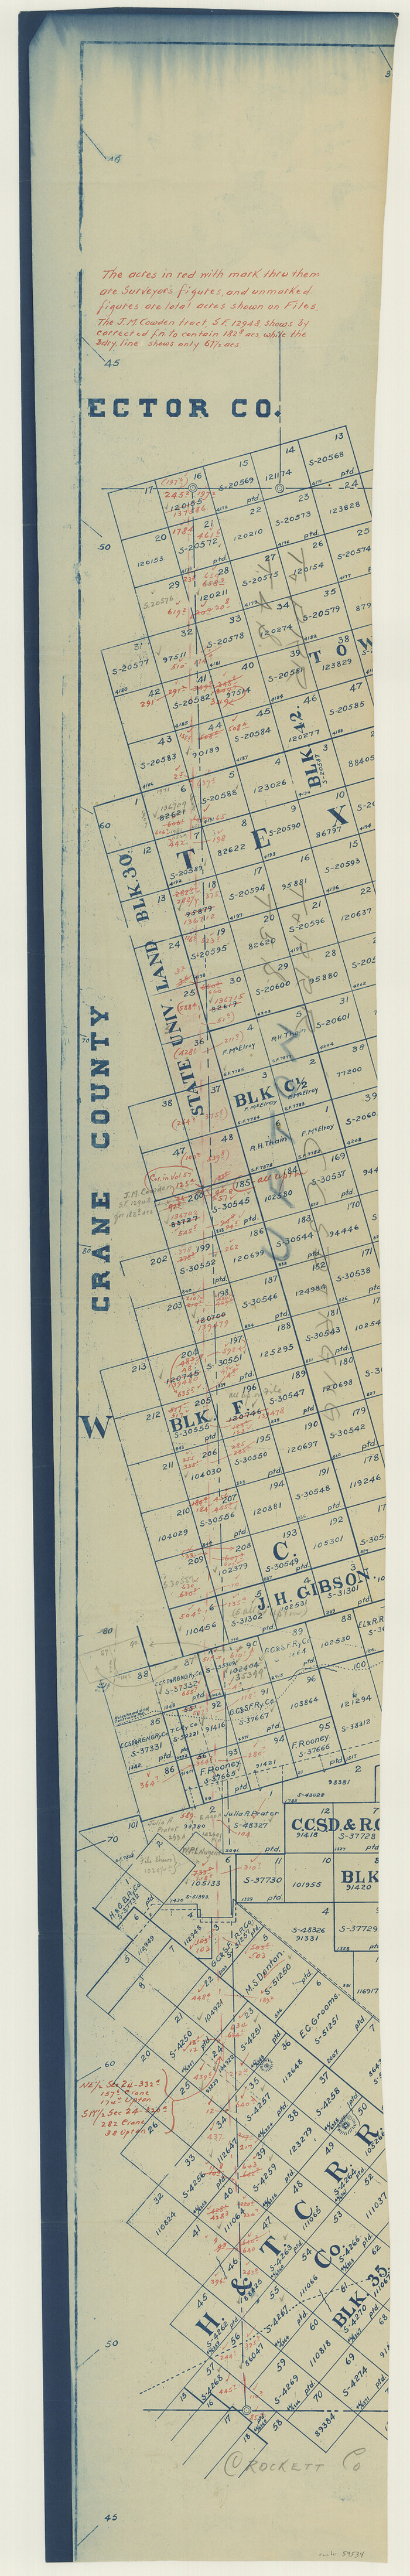 59534, Upton County Boundary File 3, General Map Collection